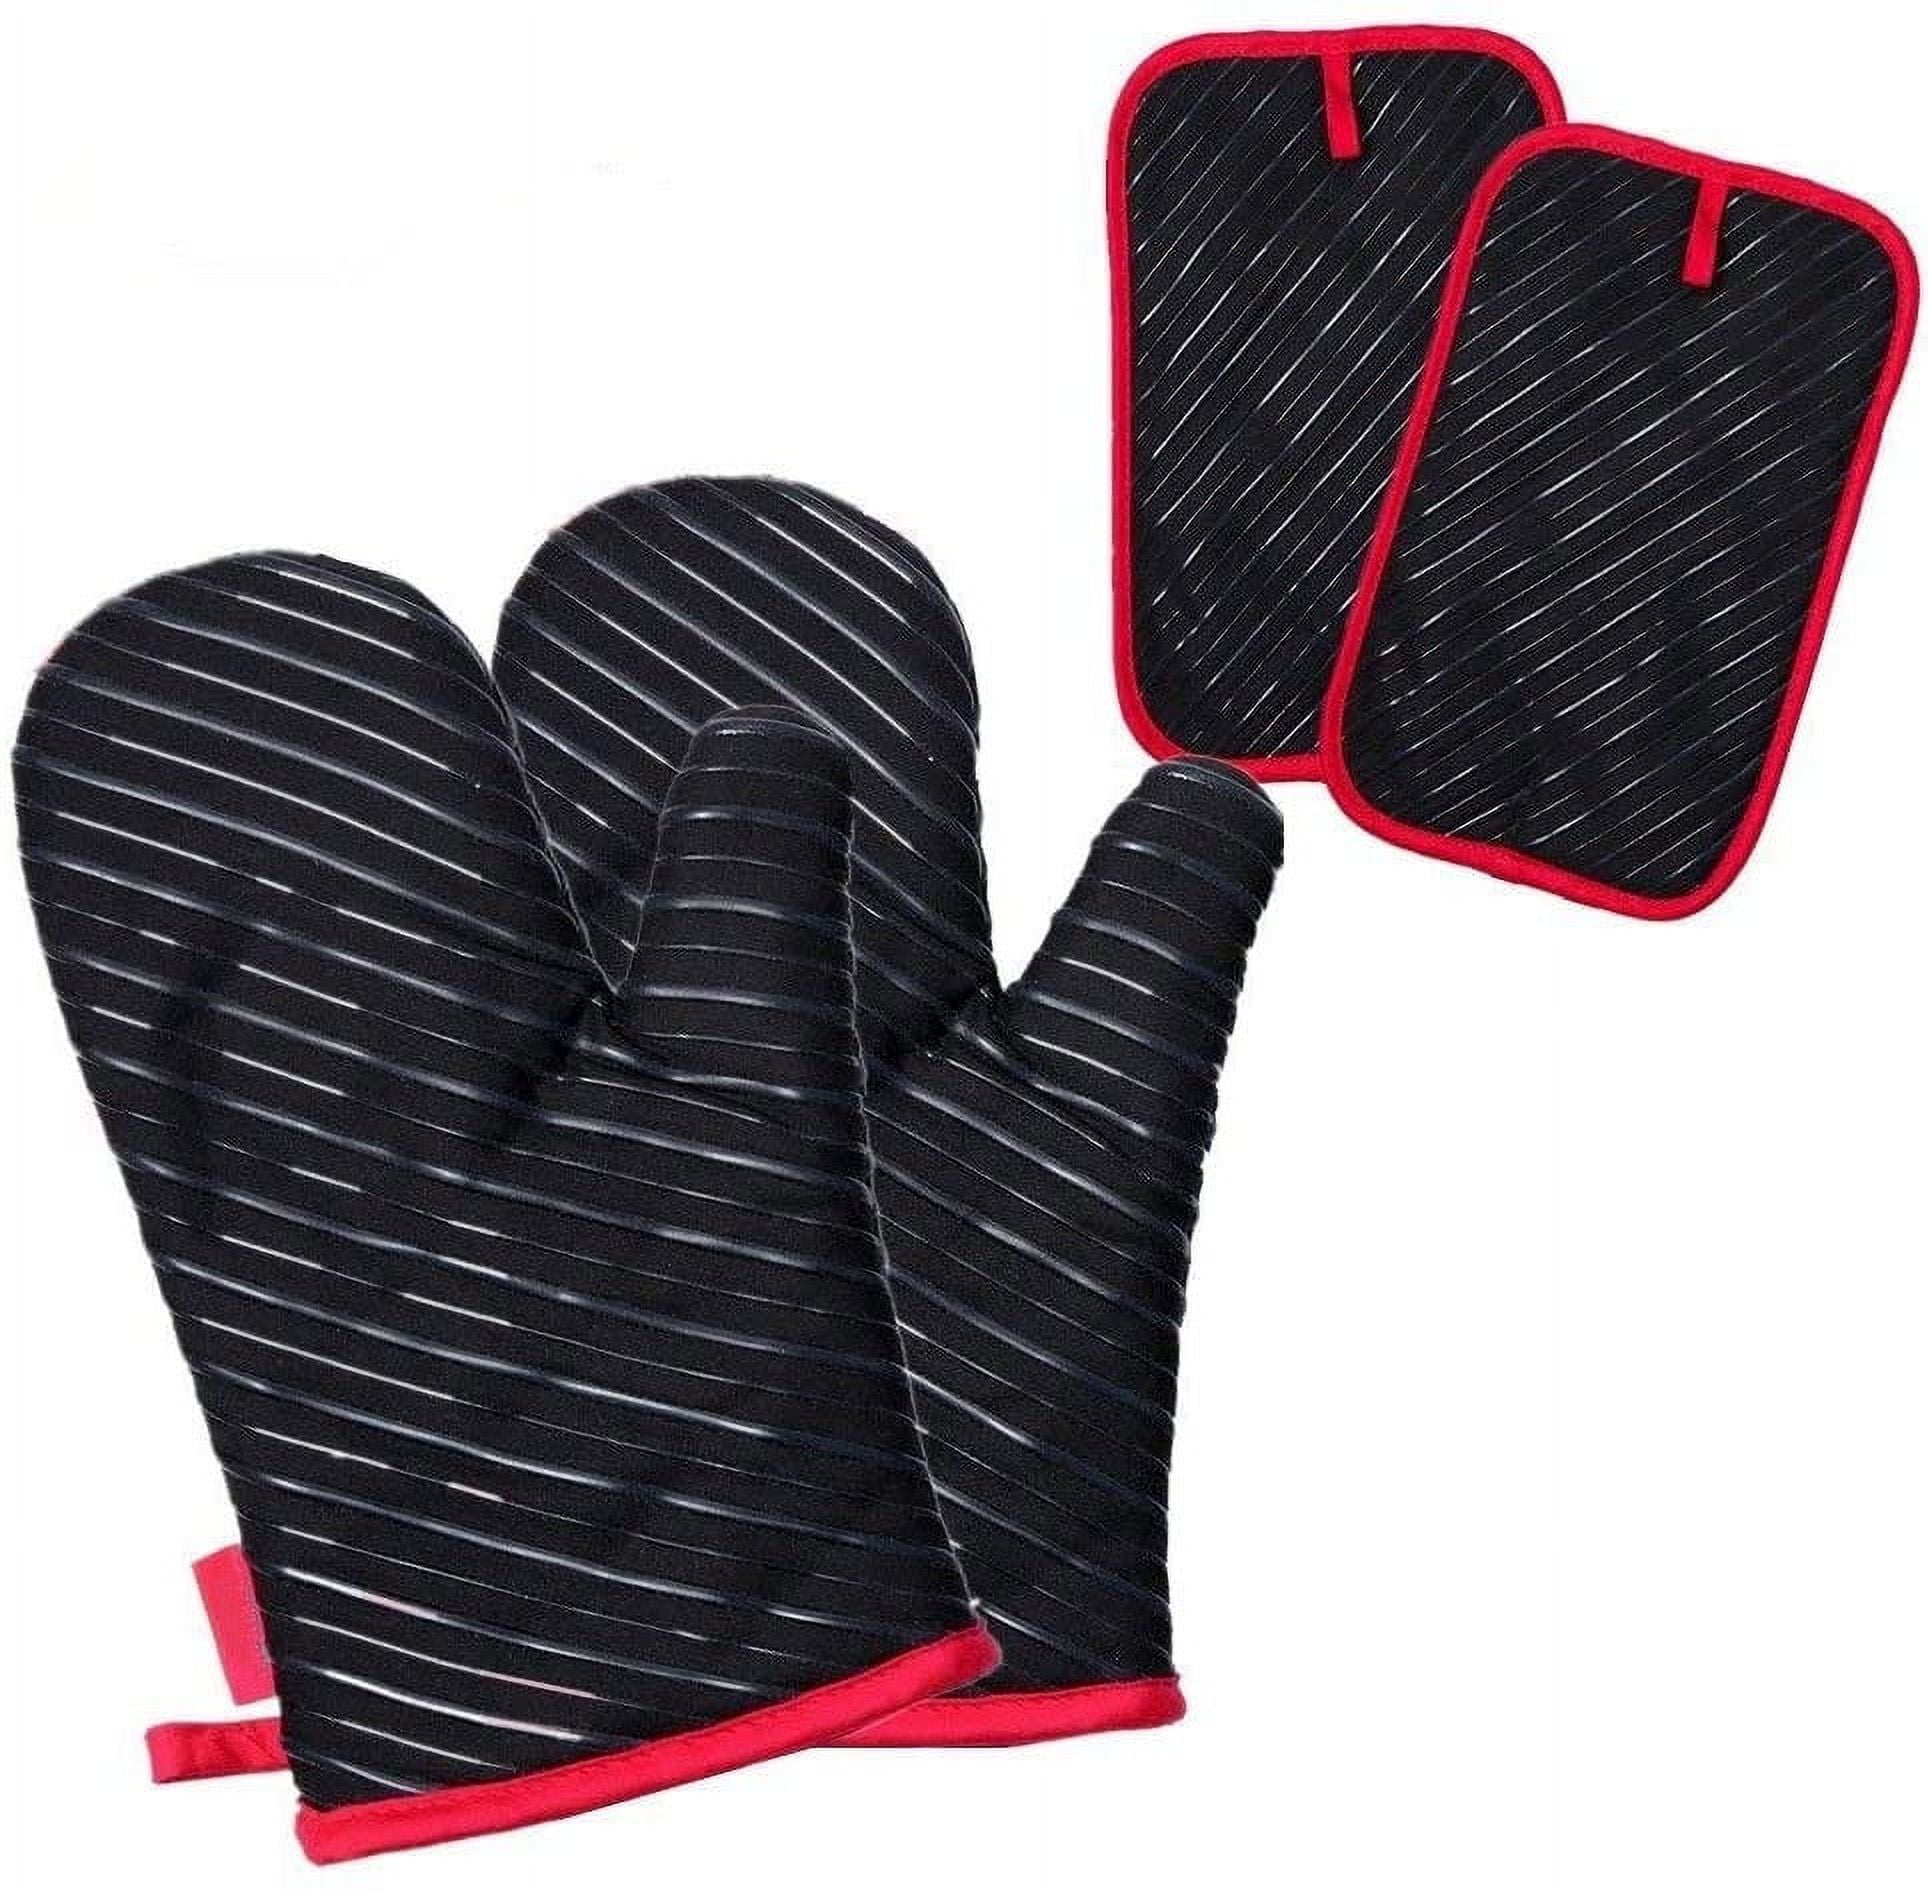 Oven Mitts Co. King and Queen Skull Black, Oven Mitts and Pot Holder 3pcs  Set, Insulated, 100% Cotton